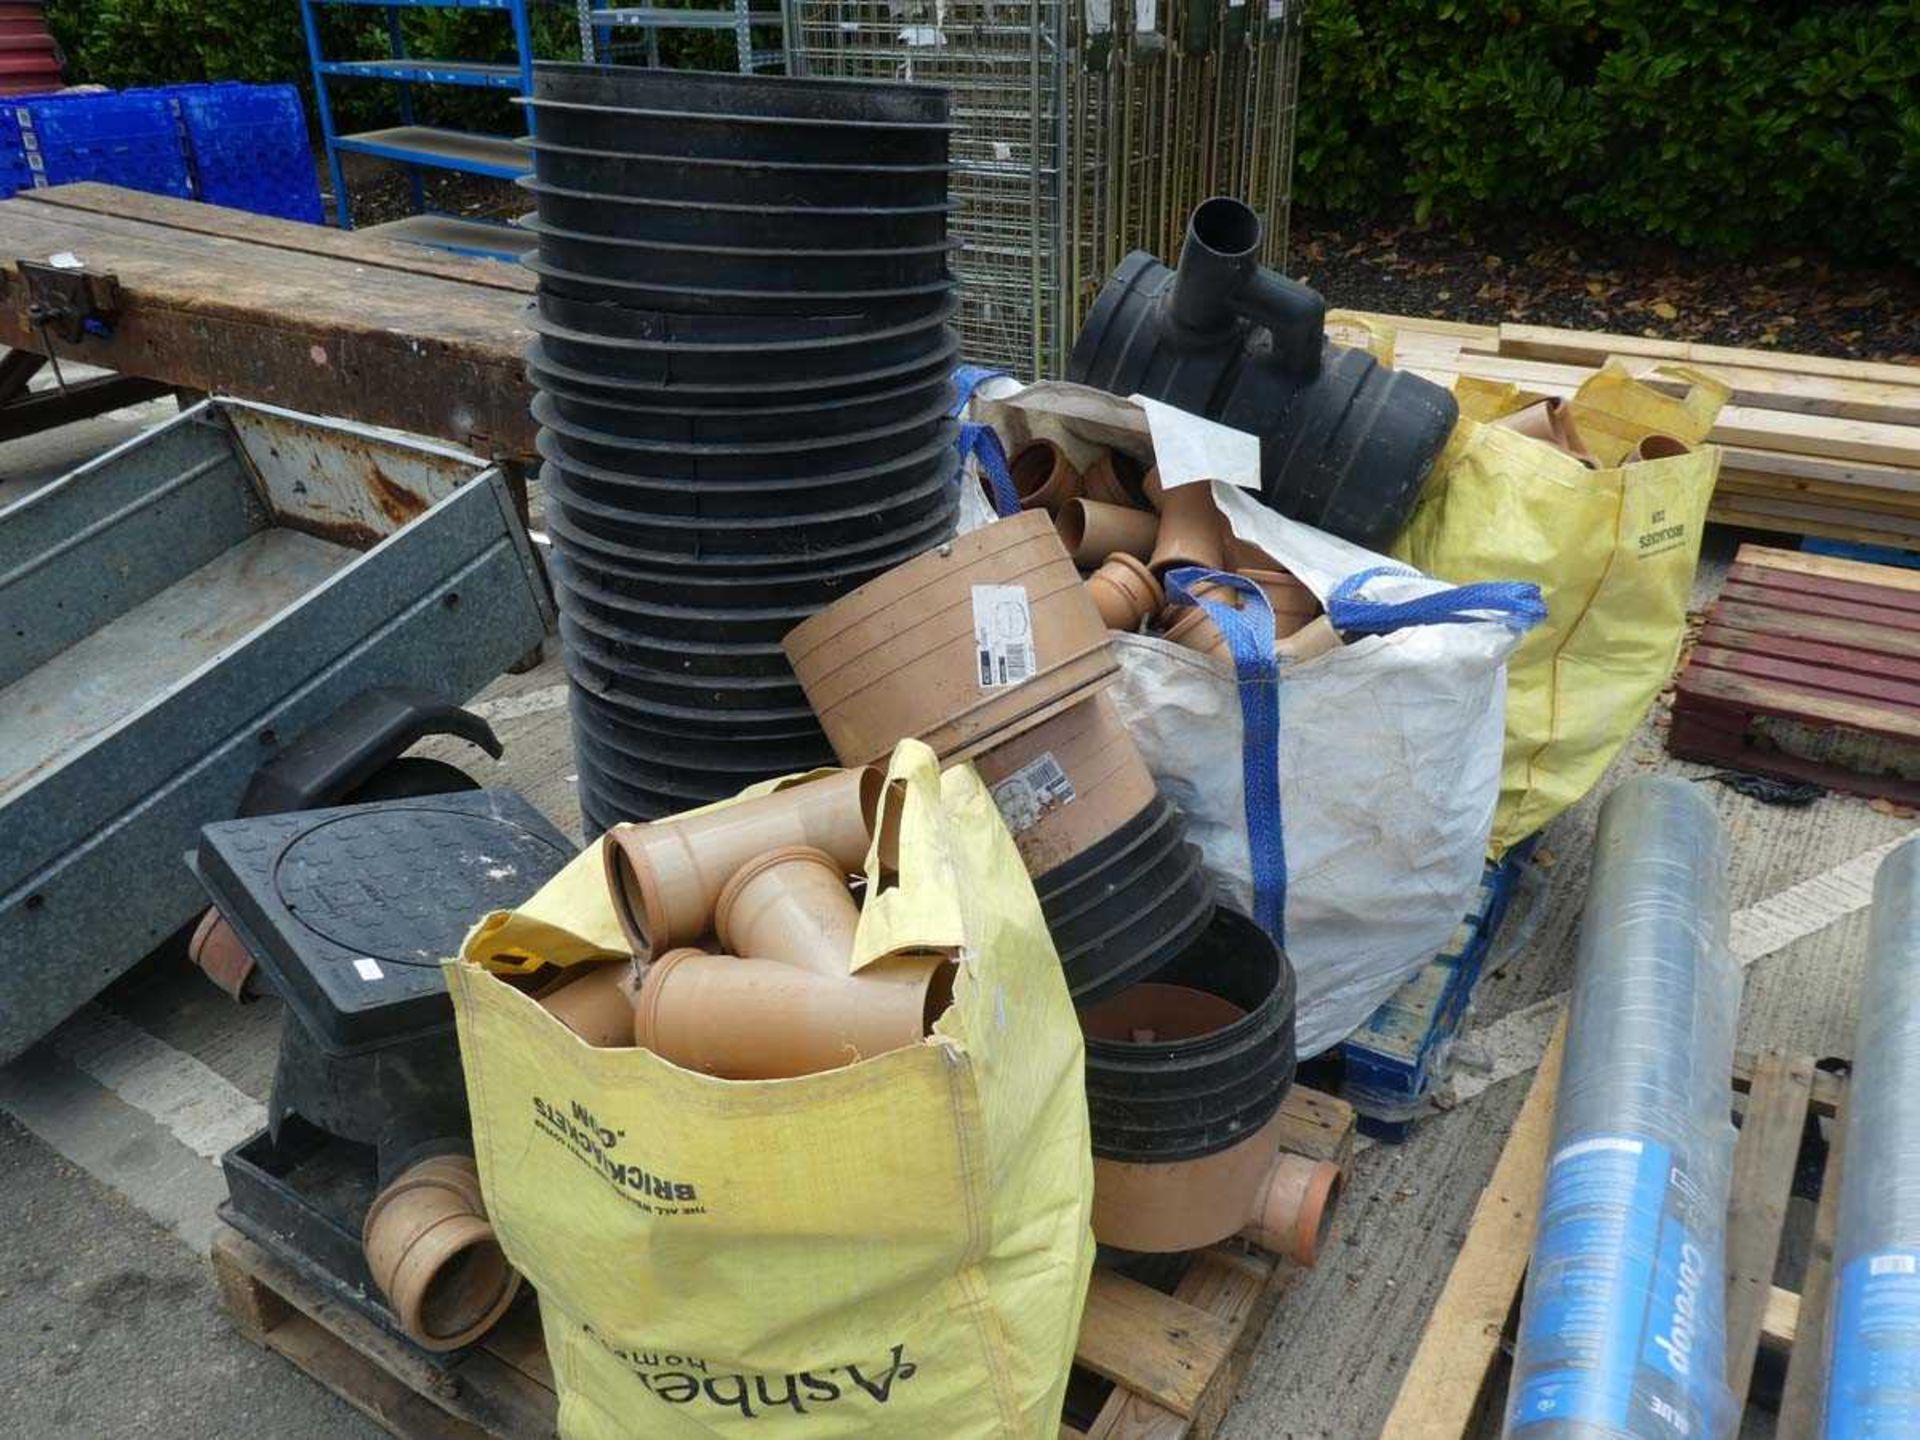 Two pallets containing a large quantity of various drainage fixtures containing within builder's